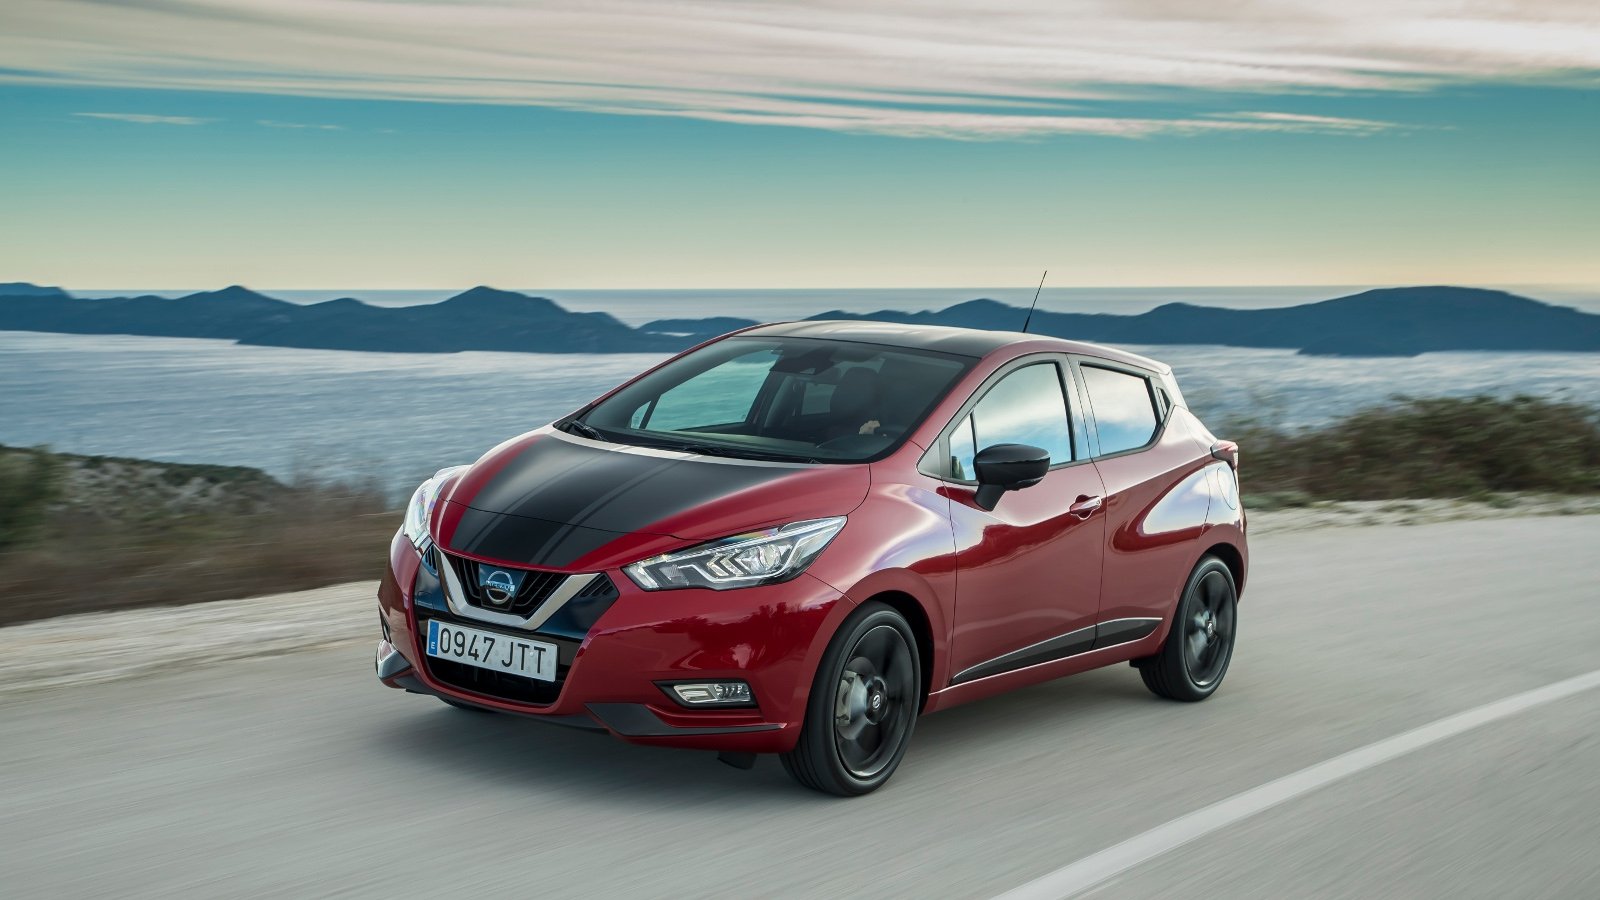 Poll: Would you buy a Nissan Micra?